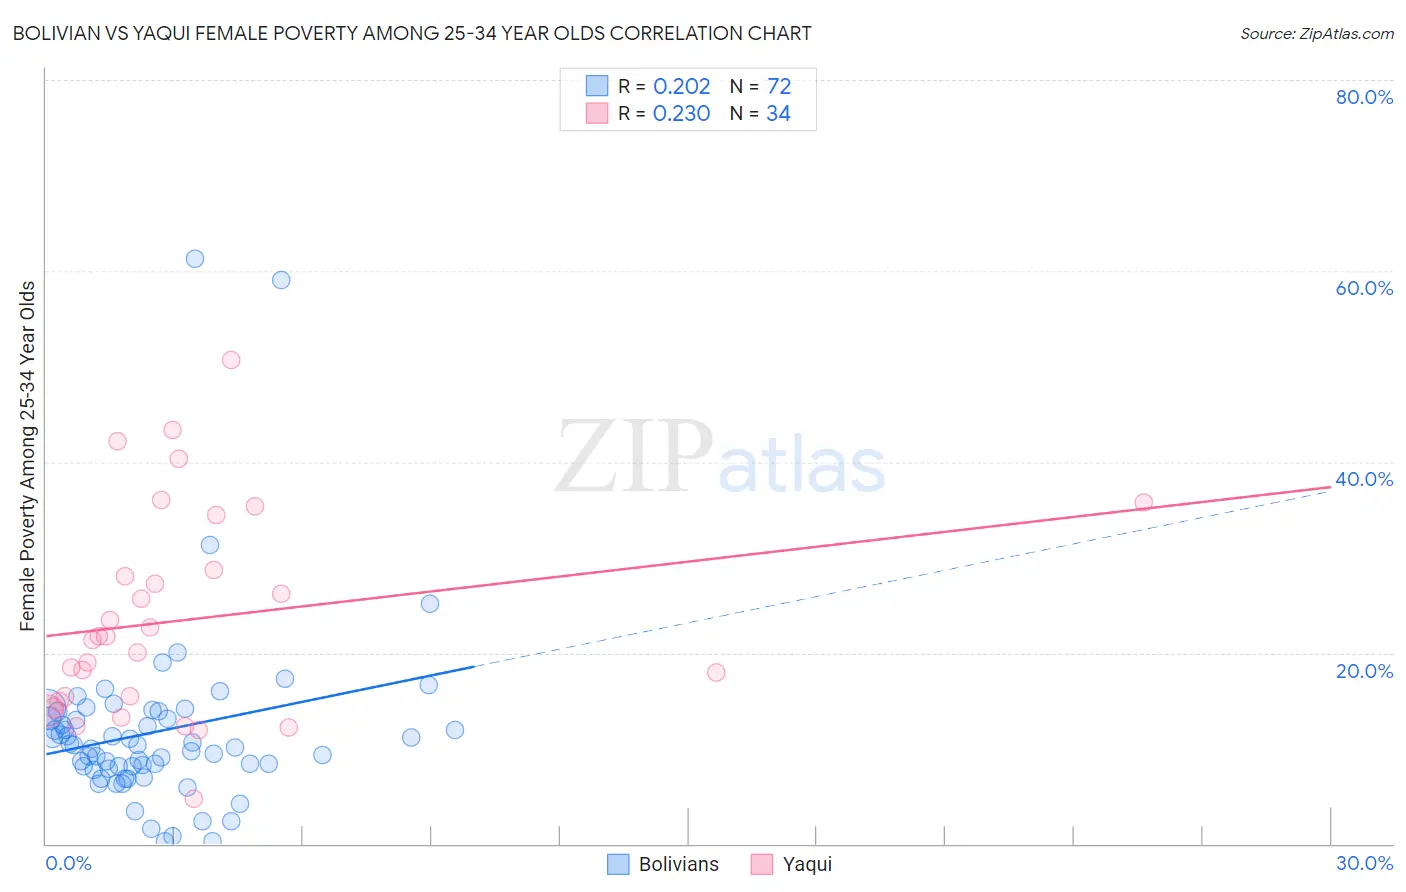 Bolivian vs Yaqui Female Poverty Among 25-34 Year Olds